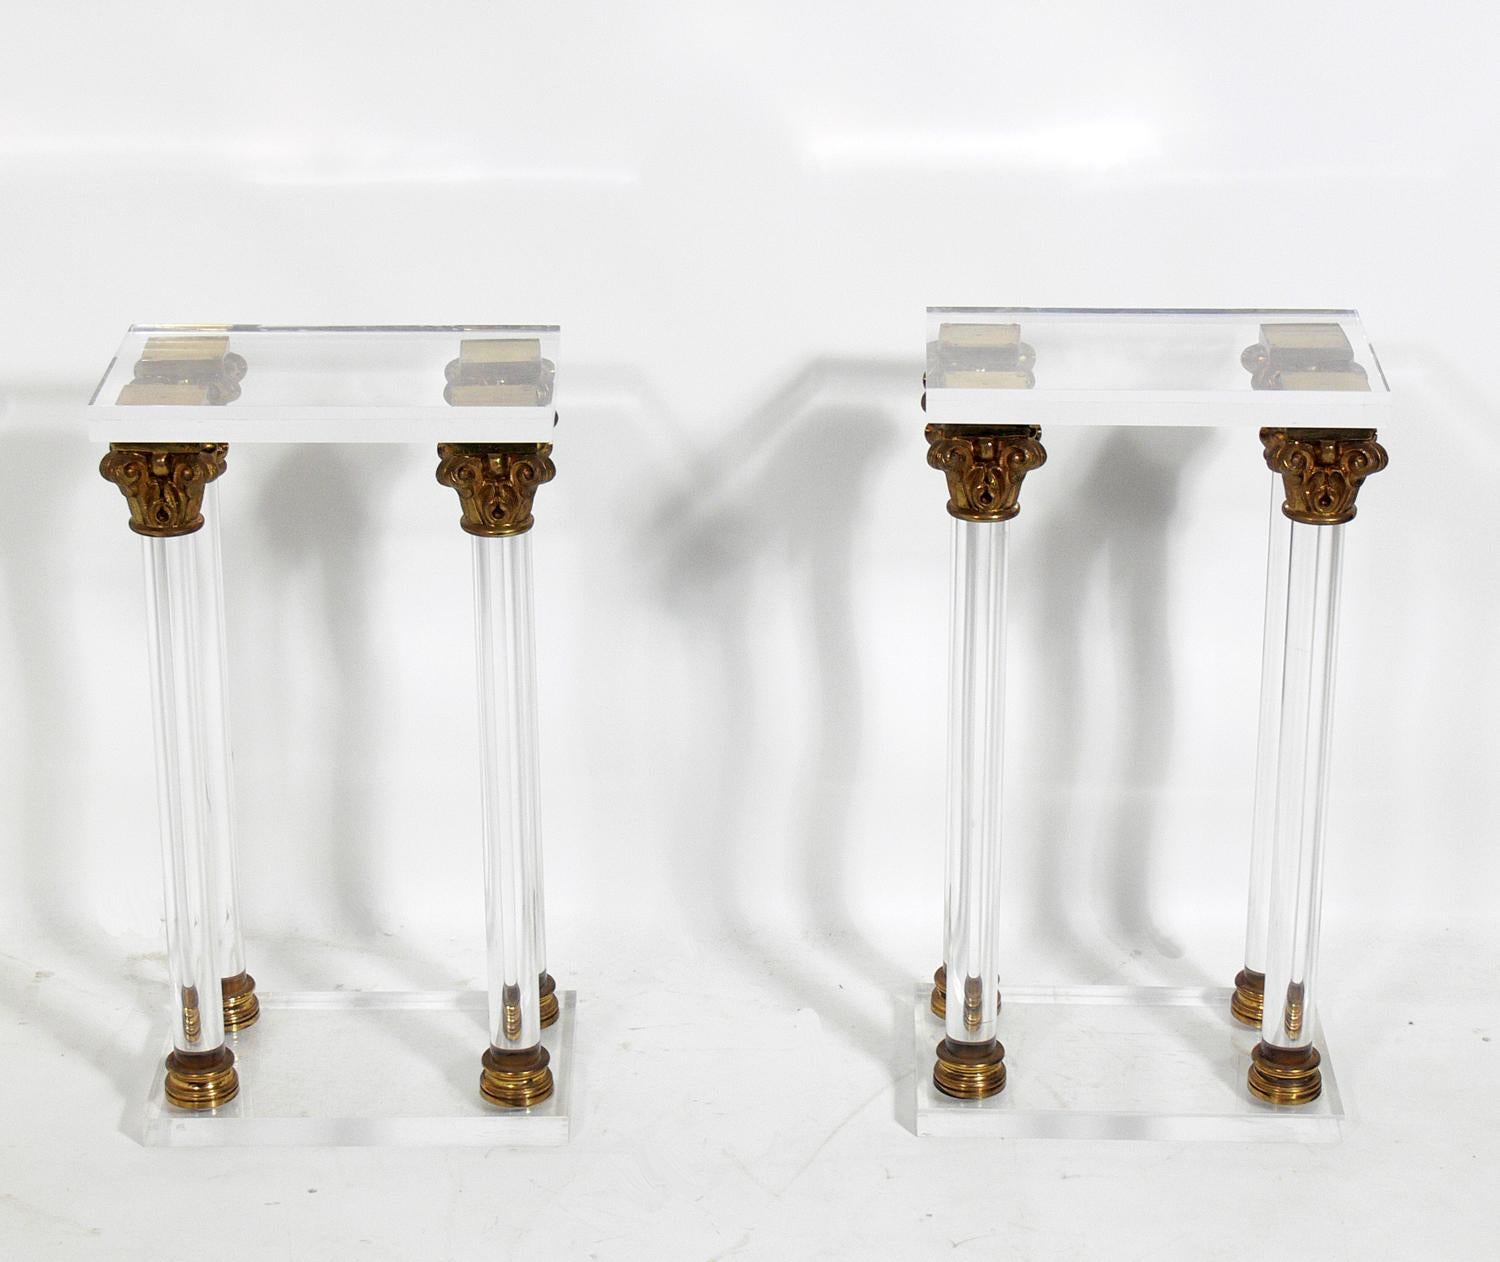 Lucite and bronze column nightstands, probably Italian, circa 1960s. They are a versatile size and can be used as nightstands or pedestals.